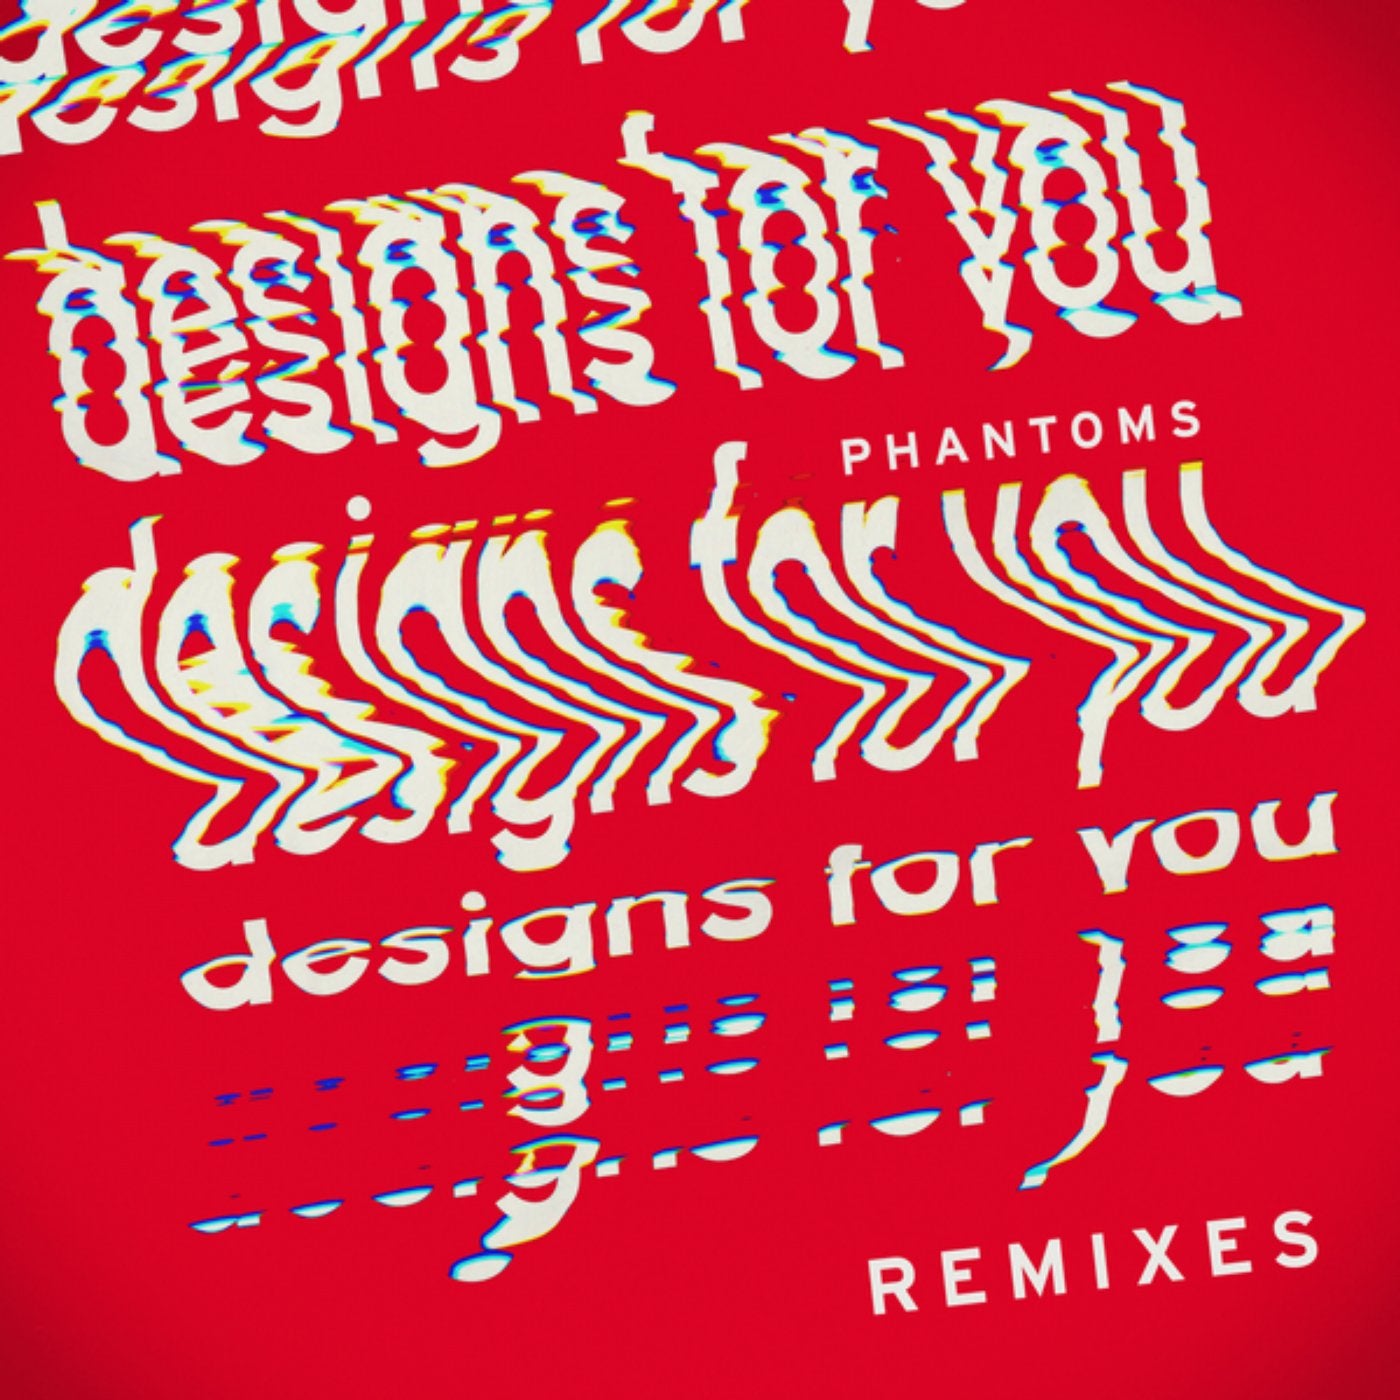 Designs For You